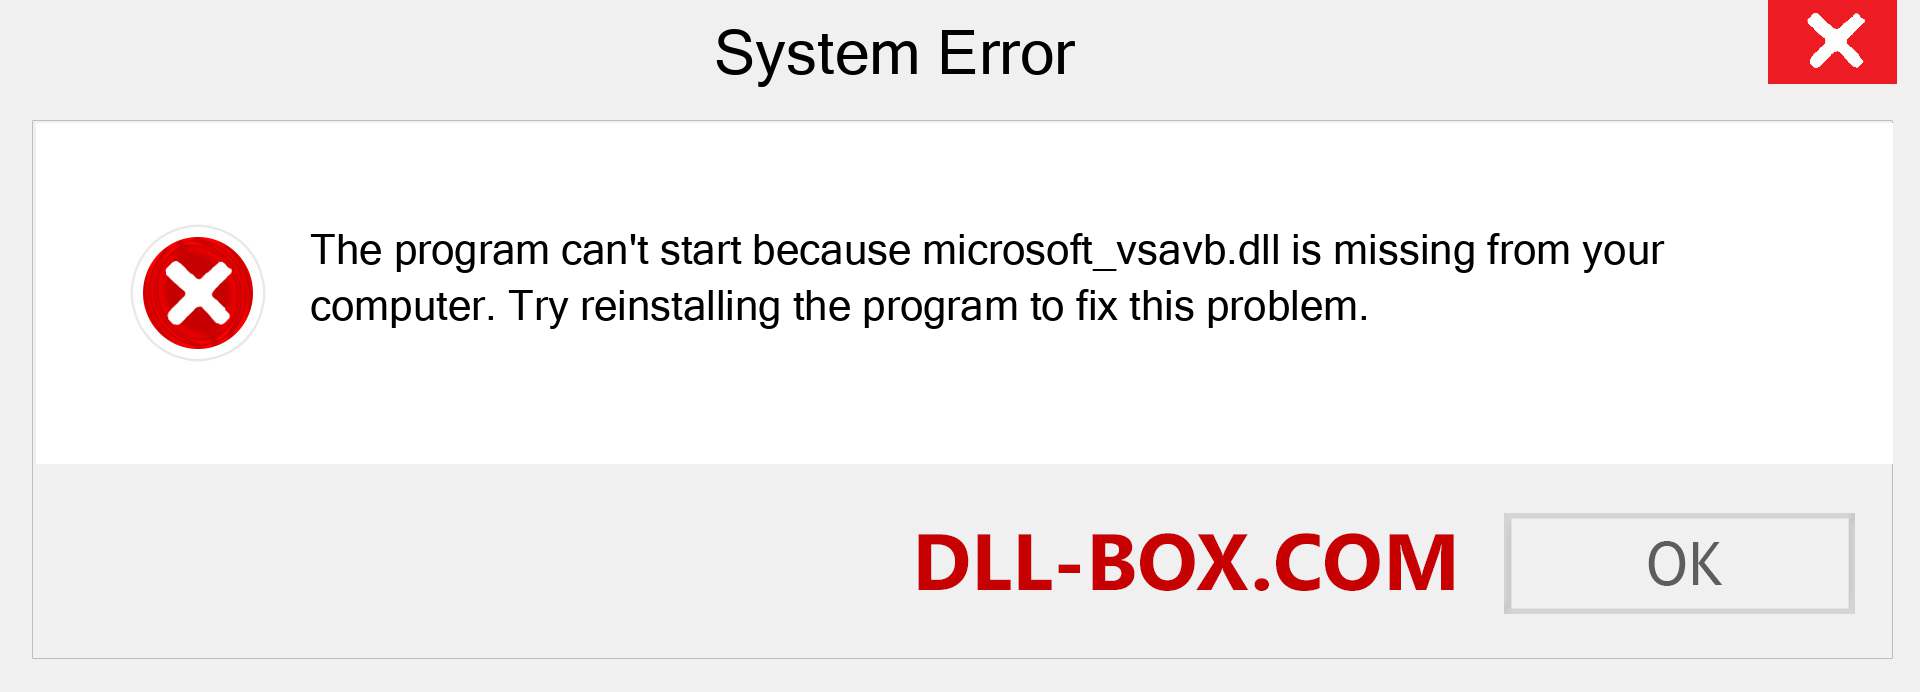  microsoft_vsavb.dll file is missing?. Download for Windows 7, 8, 10 - Fix  microsoft_vsavb dll Missing Error on Windows, photos, images